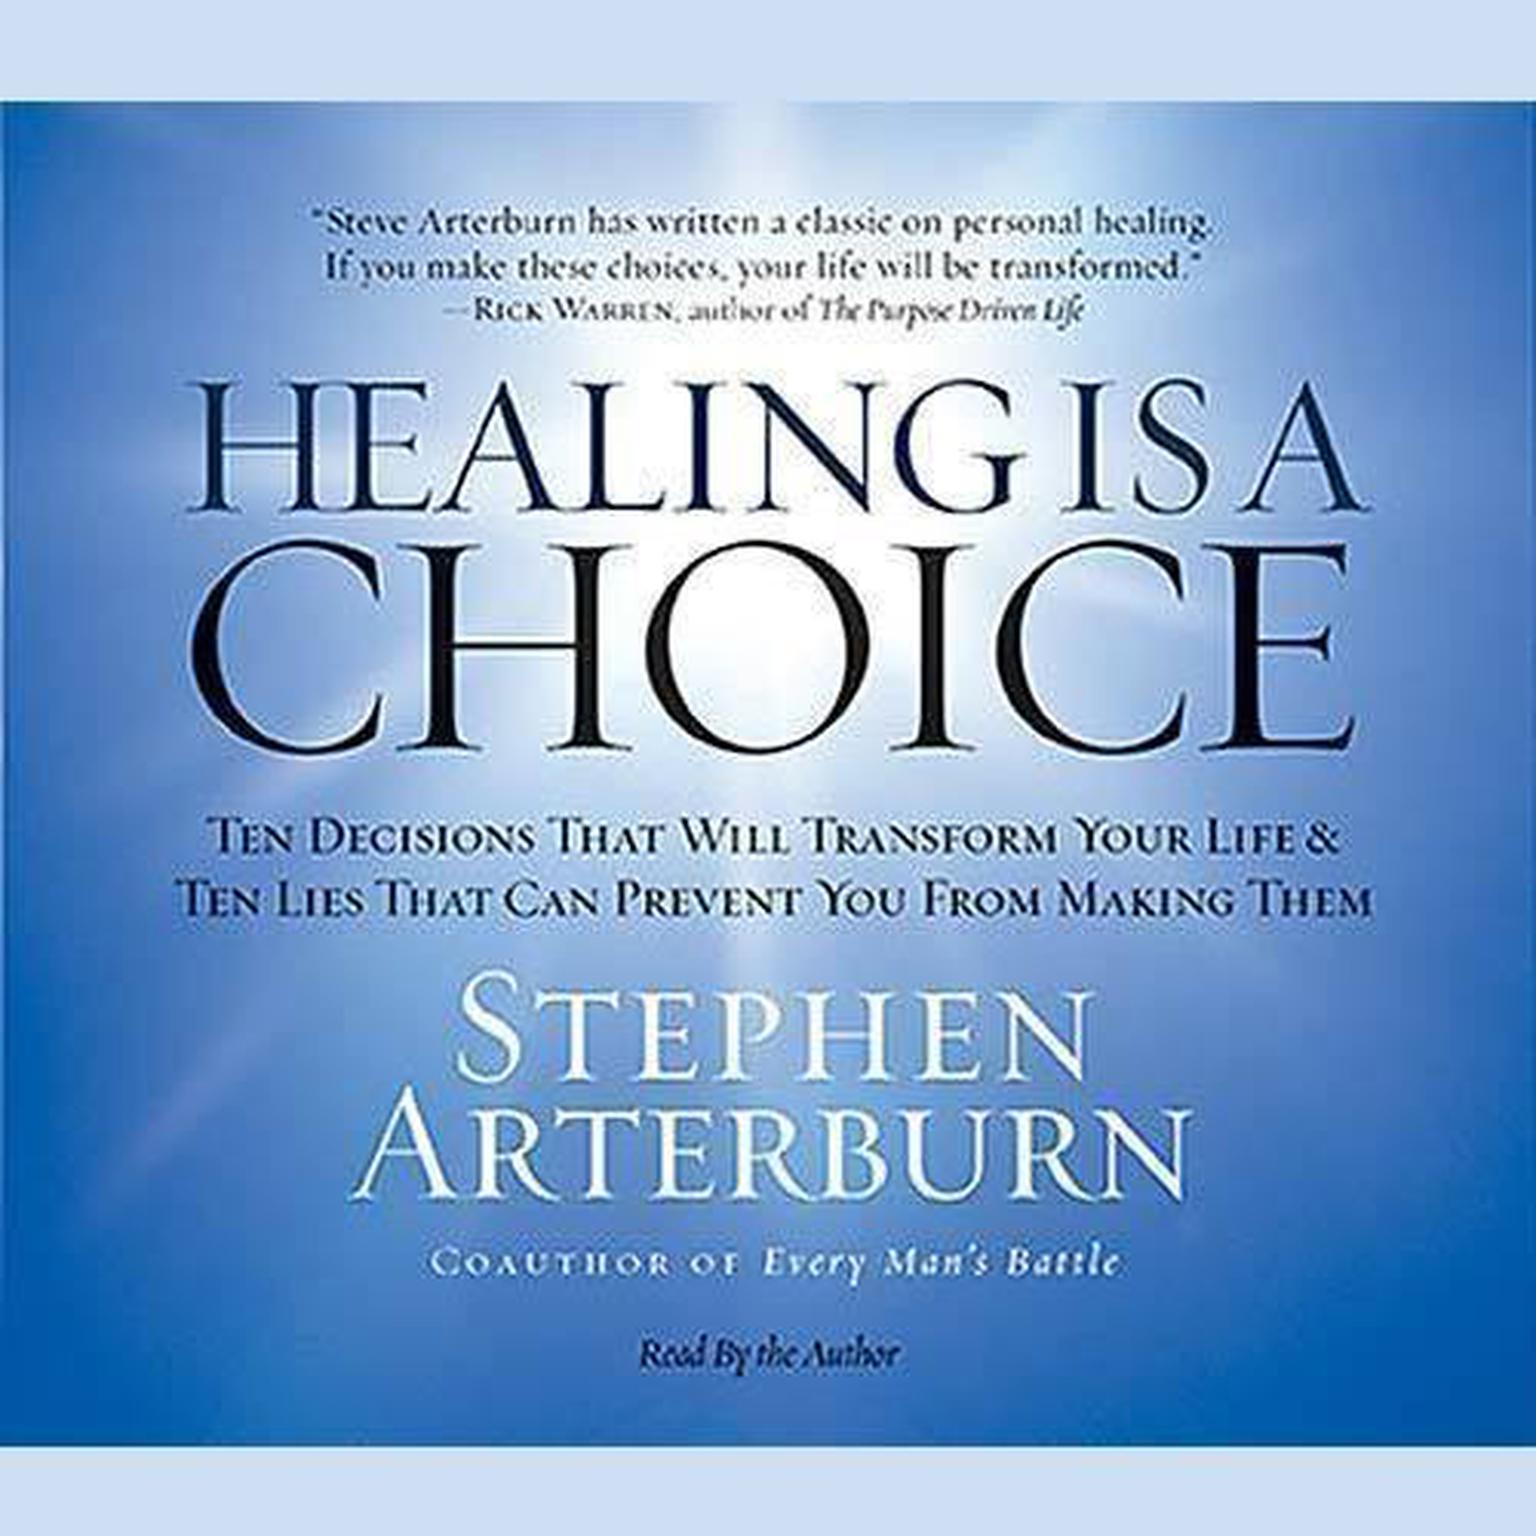 Healing Is a Choice (Abridged): 10 Decisions That Will Transform Your Life and 10 Lies That Can Prevent You From Making Them Audiobook, by Stephen Arterburn